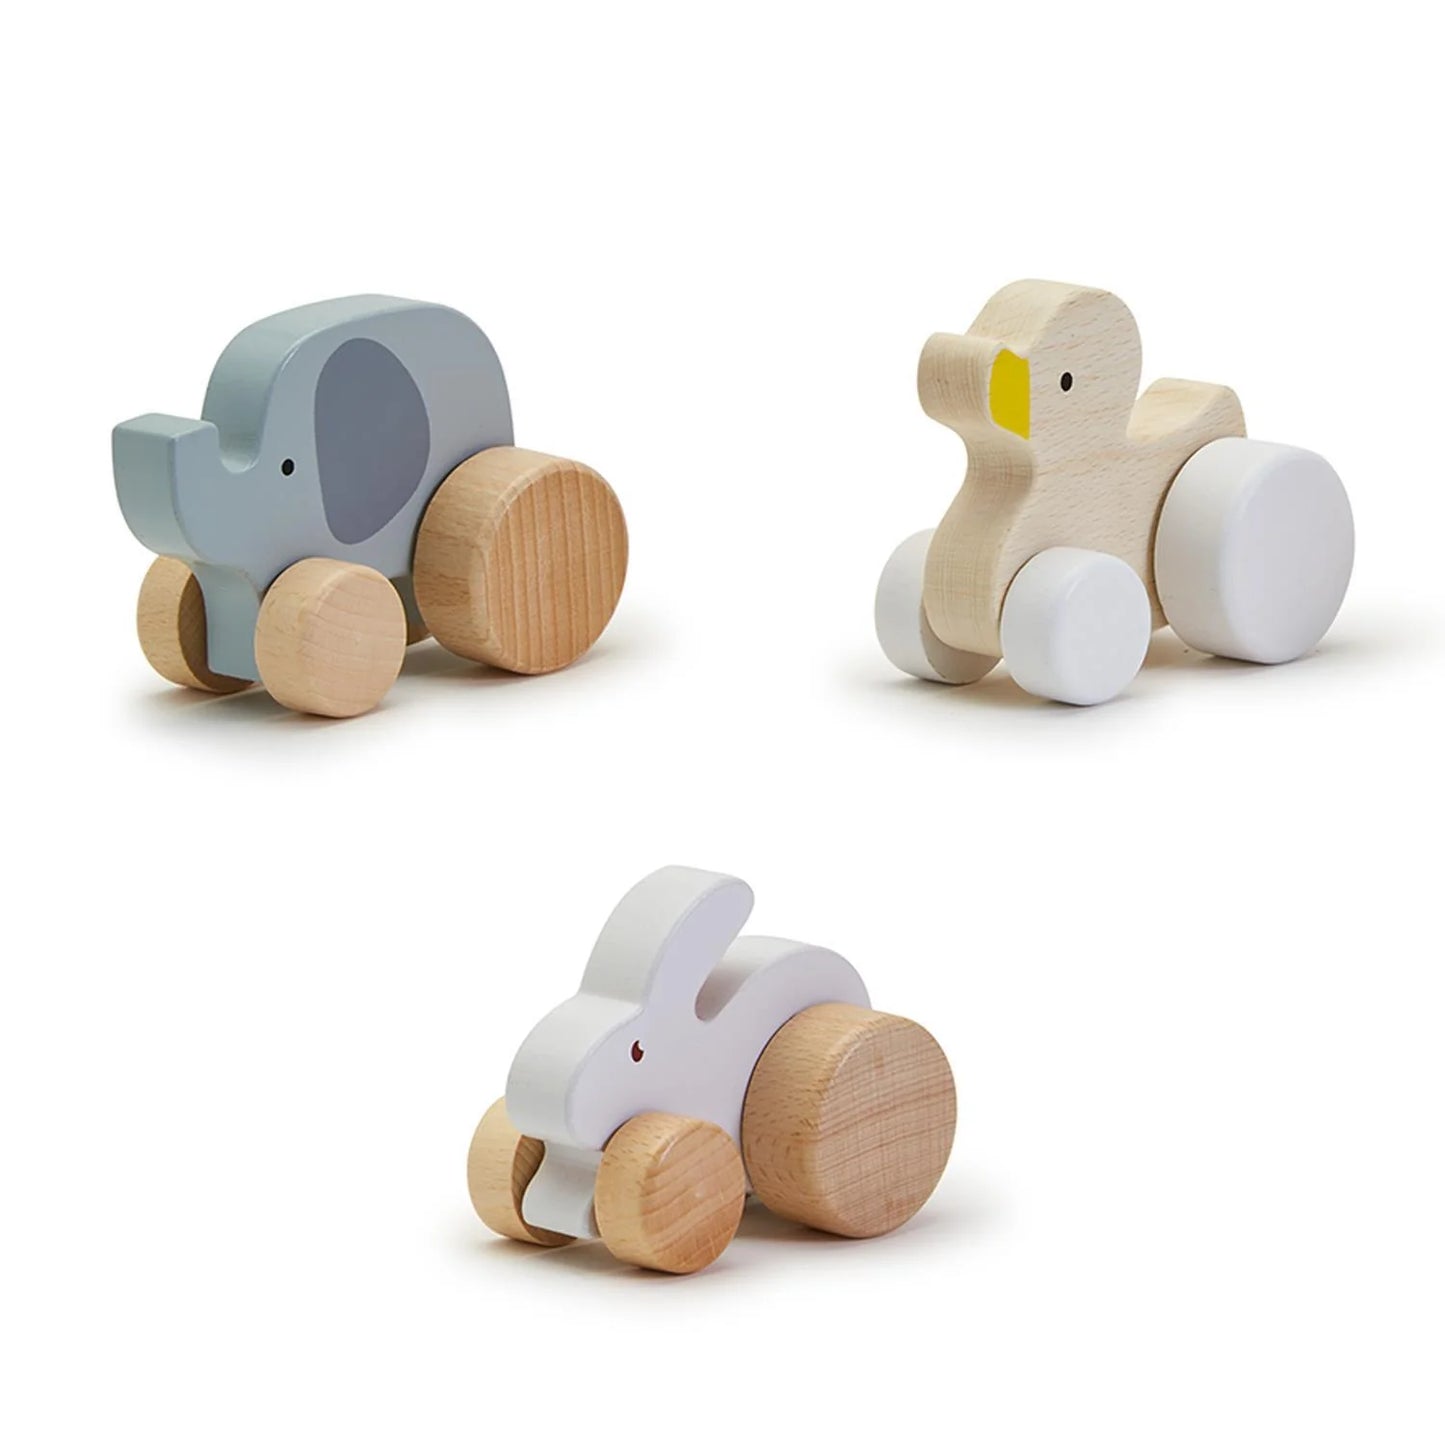 Wooden Animal Toy